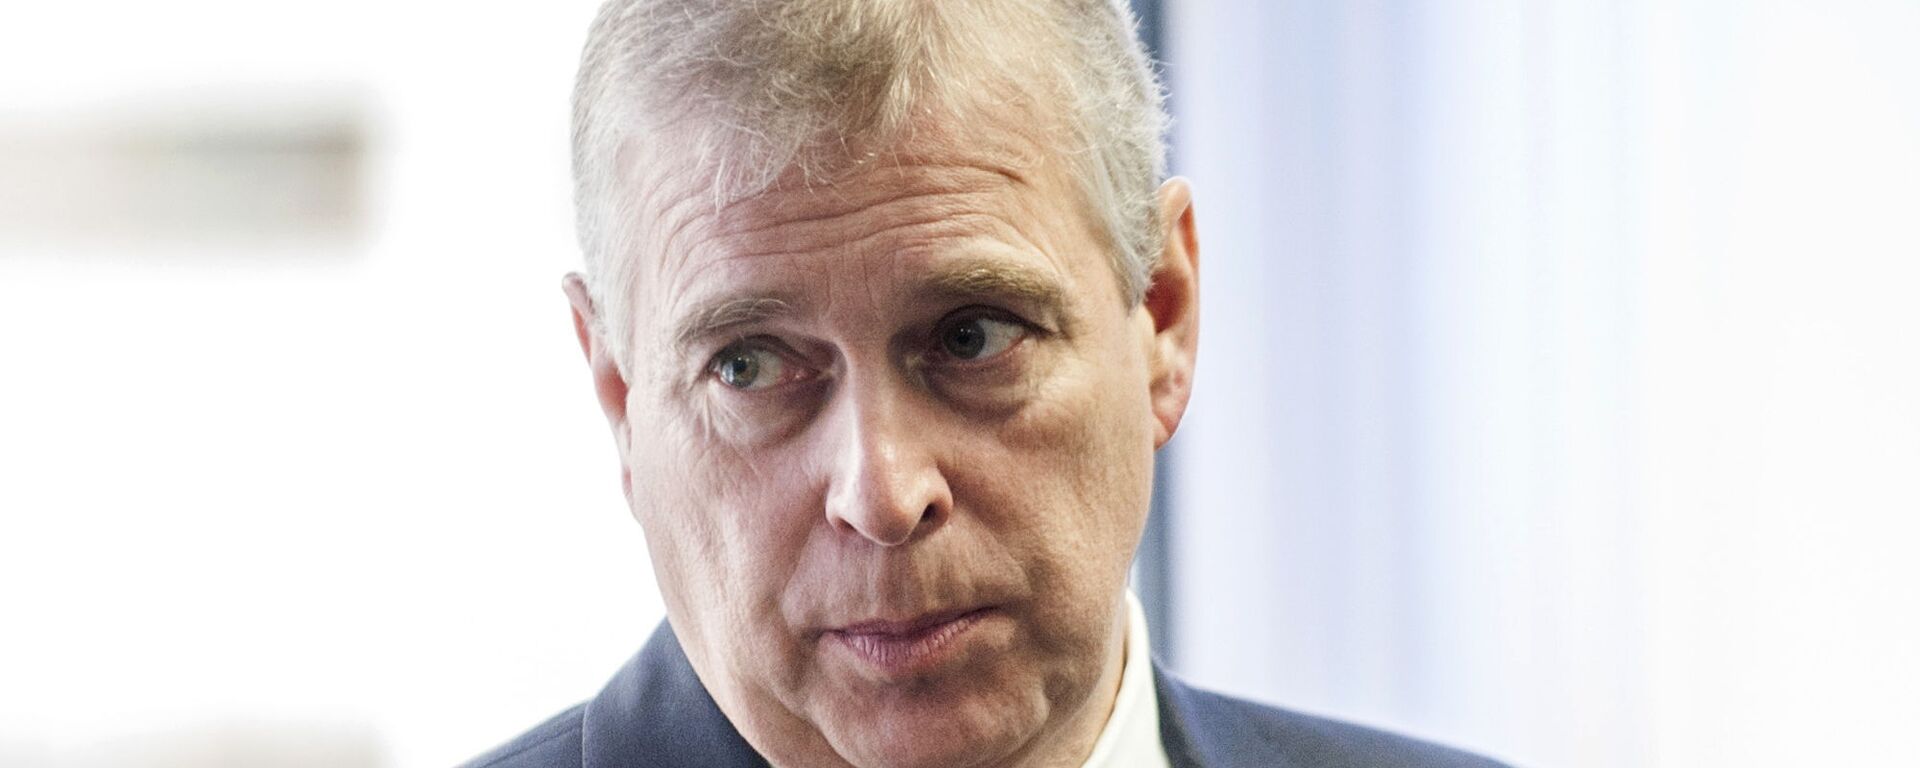 In this Monday, April 13, 2015 file photo, Britain's Prince Andrew visits the AkzoNobel Decorative Paints facility in Slough, England. Prince Andrew's effort to put the Jeffrey Epstein scandal behind him may have instead done him irreparable harm. While aides are trying to put the best face on his widely criticized interview with the BBC, royal watchers are asking whether he can survive the public relations disaster and remain a working member of the royal family - Sputnik International, 1920, 25.09.2021